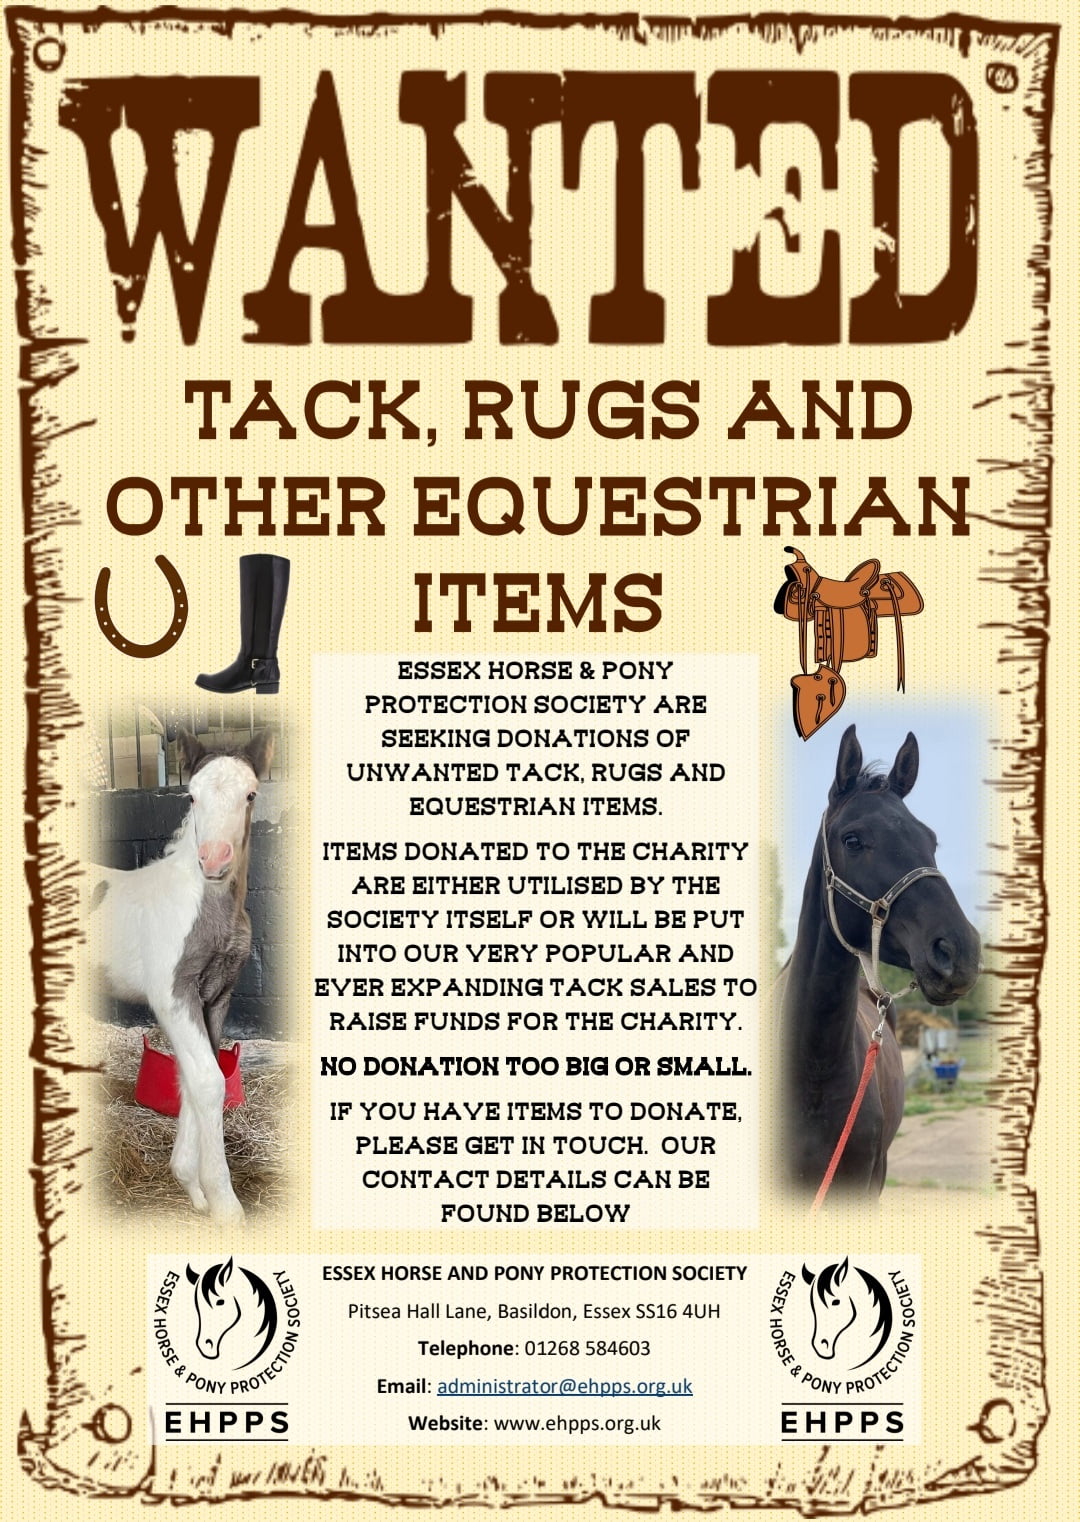 Wanted - Tack, Rugs and other Equestrian Items